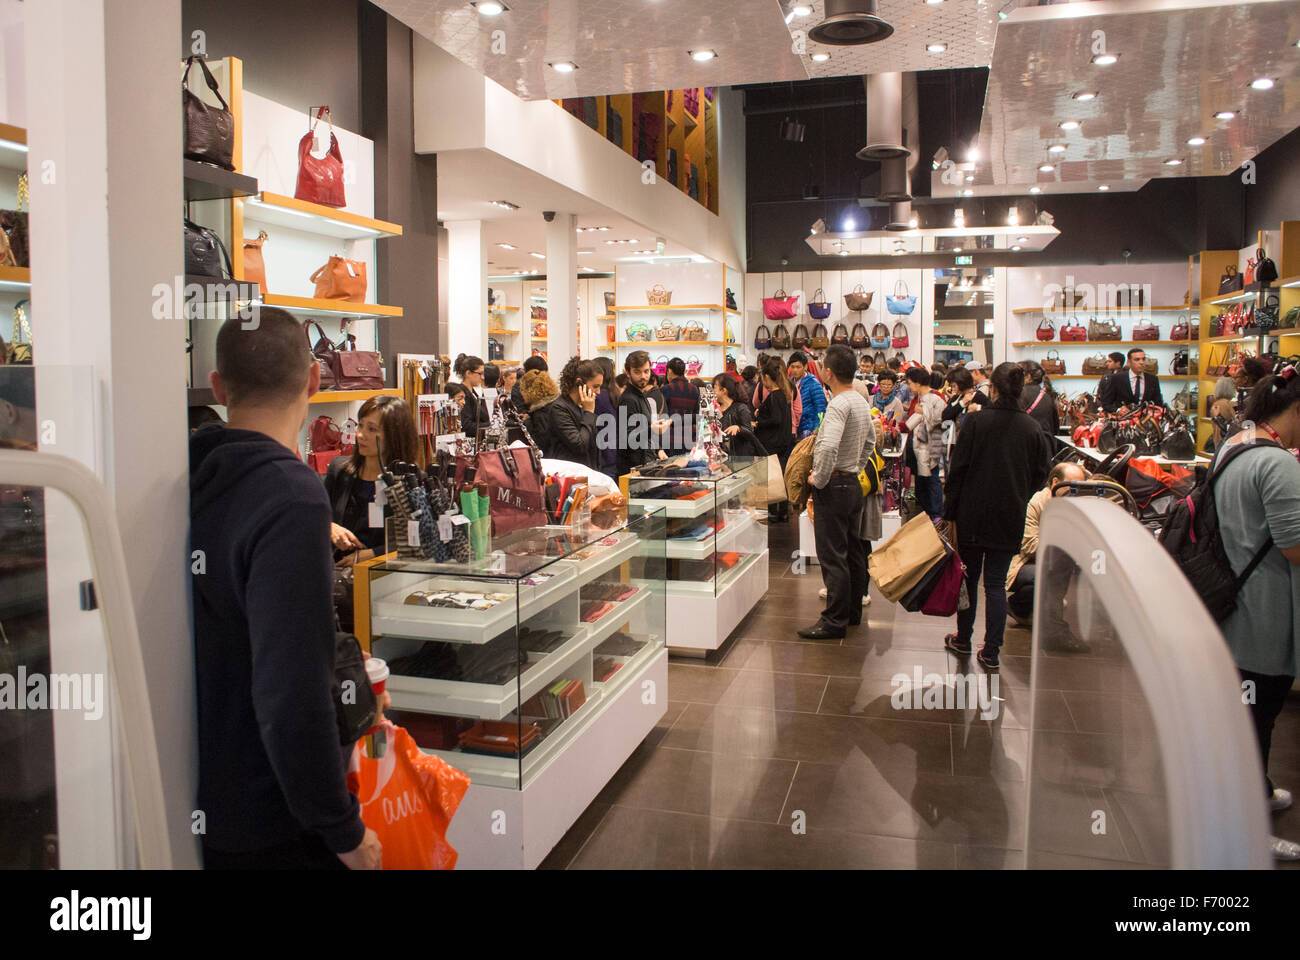 Paris, France, People Shopping in Luxury Outlet Mall, Centre Stock Photo, Royalty Free Image ...